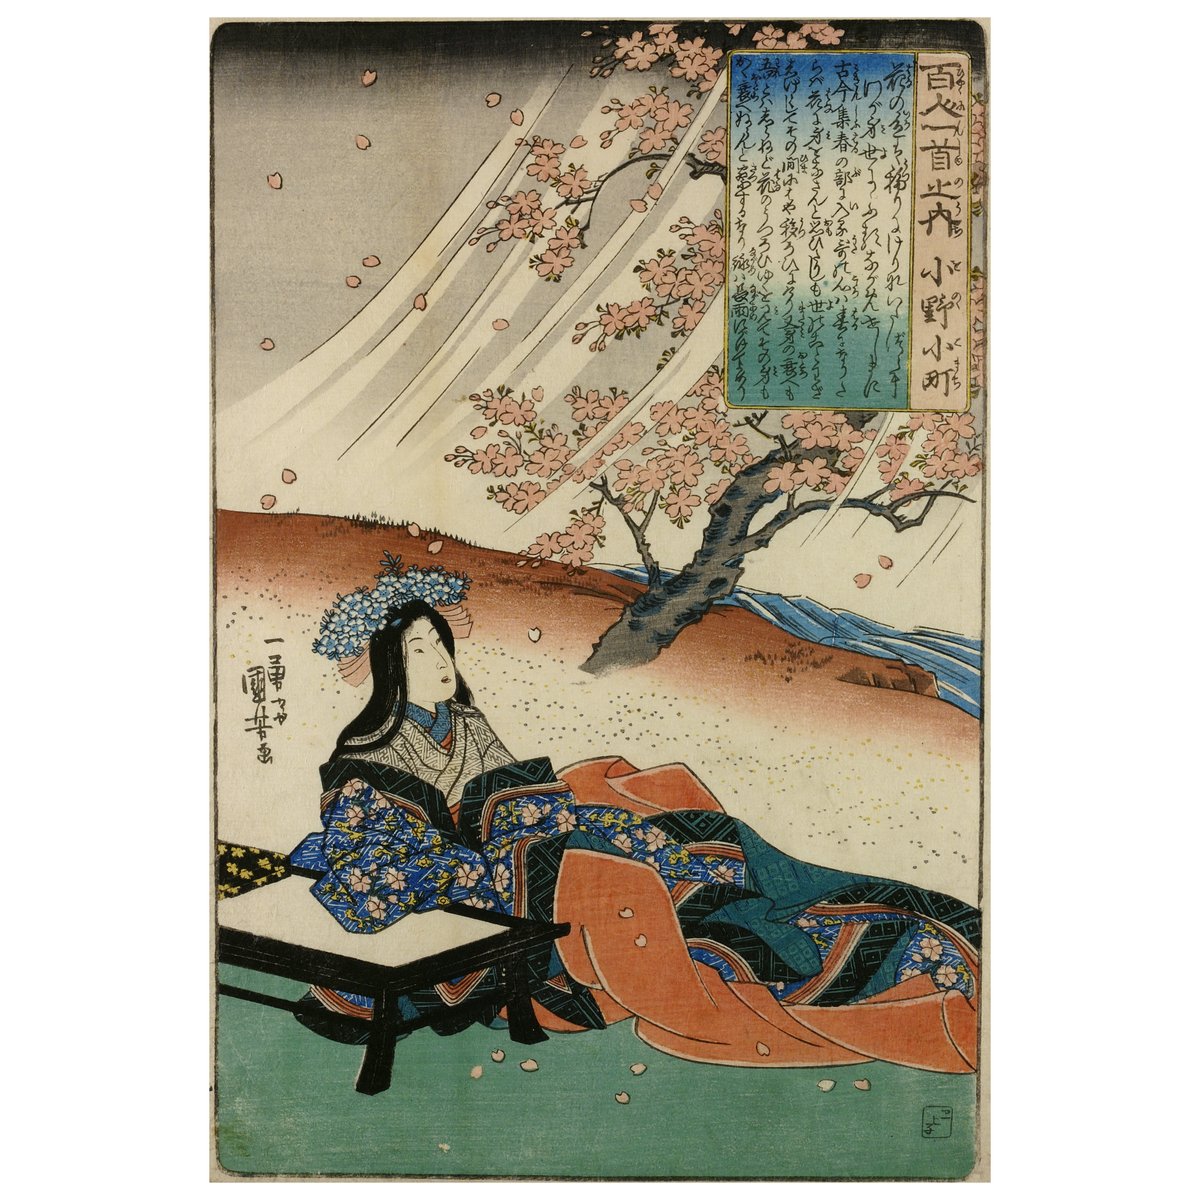 🌸 A life in vain. My looks, talents faded like these cherry blossoms paling in the endless rains that I gaze out upon, alone 🌧 Today is #InternationalPoetryDay! These moving words were composed by Japanese poet Ono no Komachi, shown in this print 🖋 ow.ly/1uKF50Nhj5L